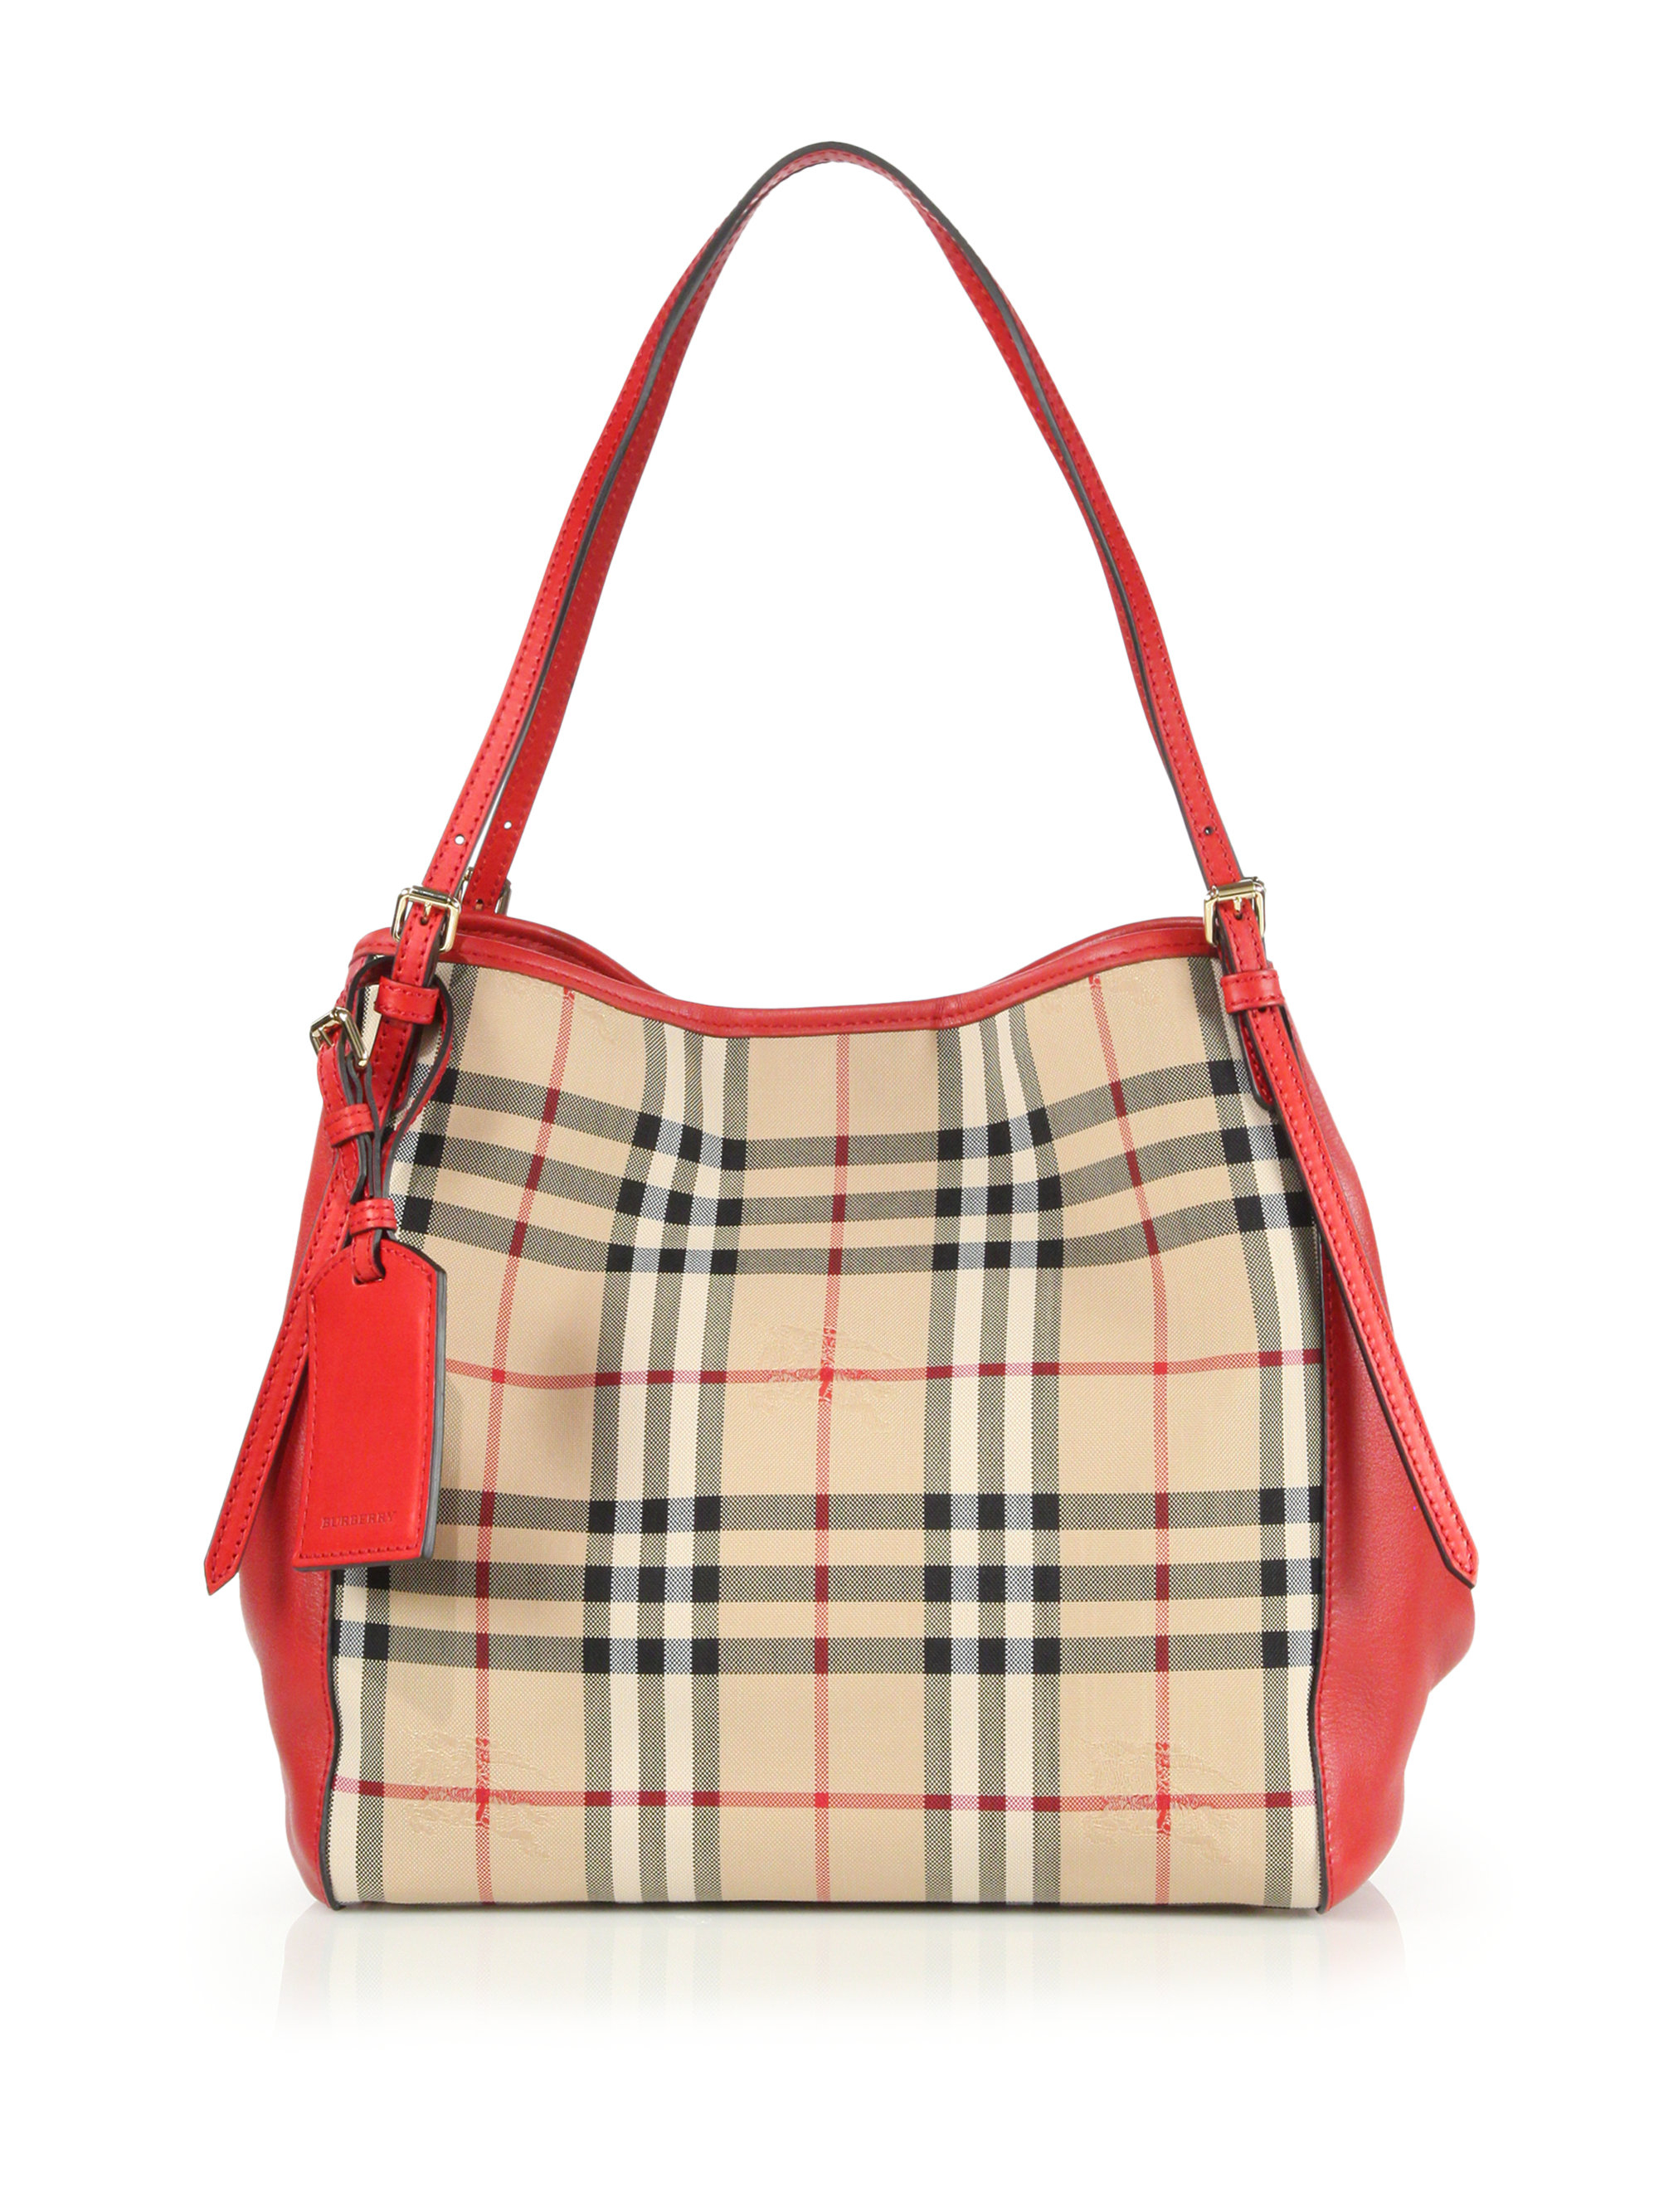 Burberry Canter Small Horseferry Check Tote in Red | Lyst